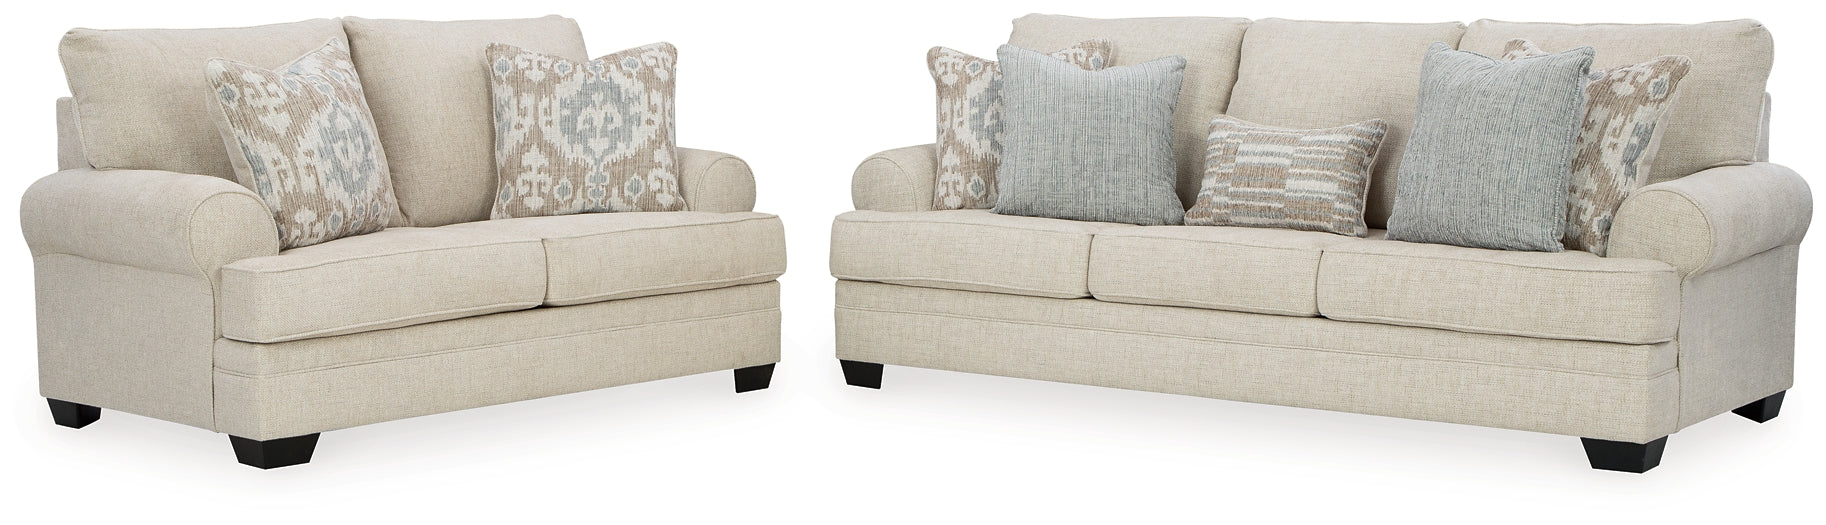 Rilynn Sofa and Loveseat at Walker Mattress and Furniture Locations in Cedar Park and Belton TX.